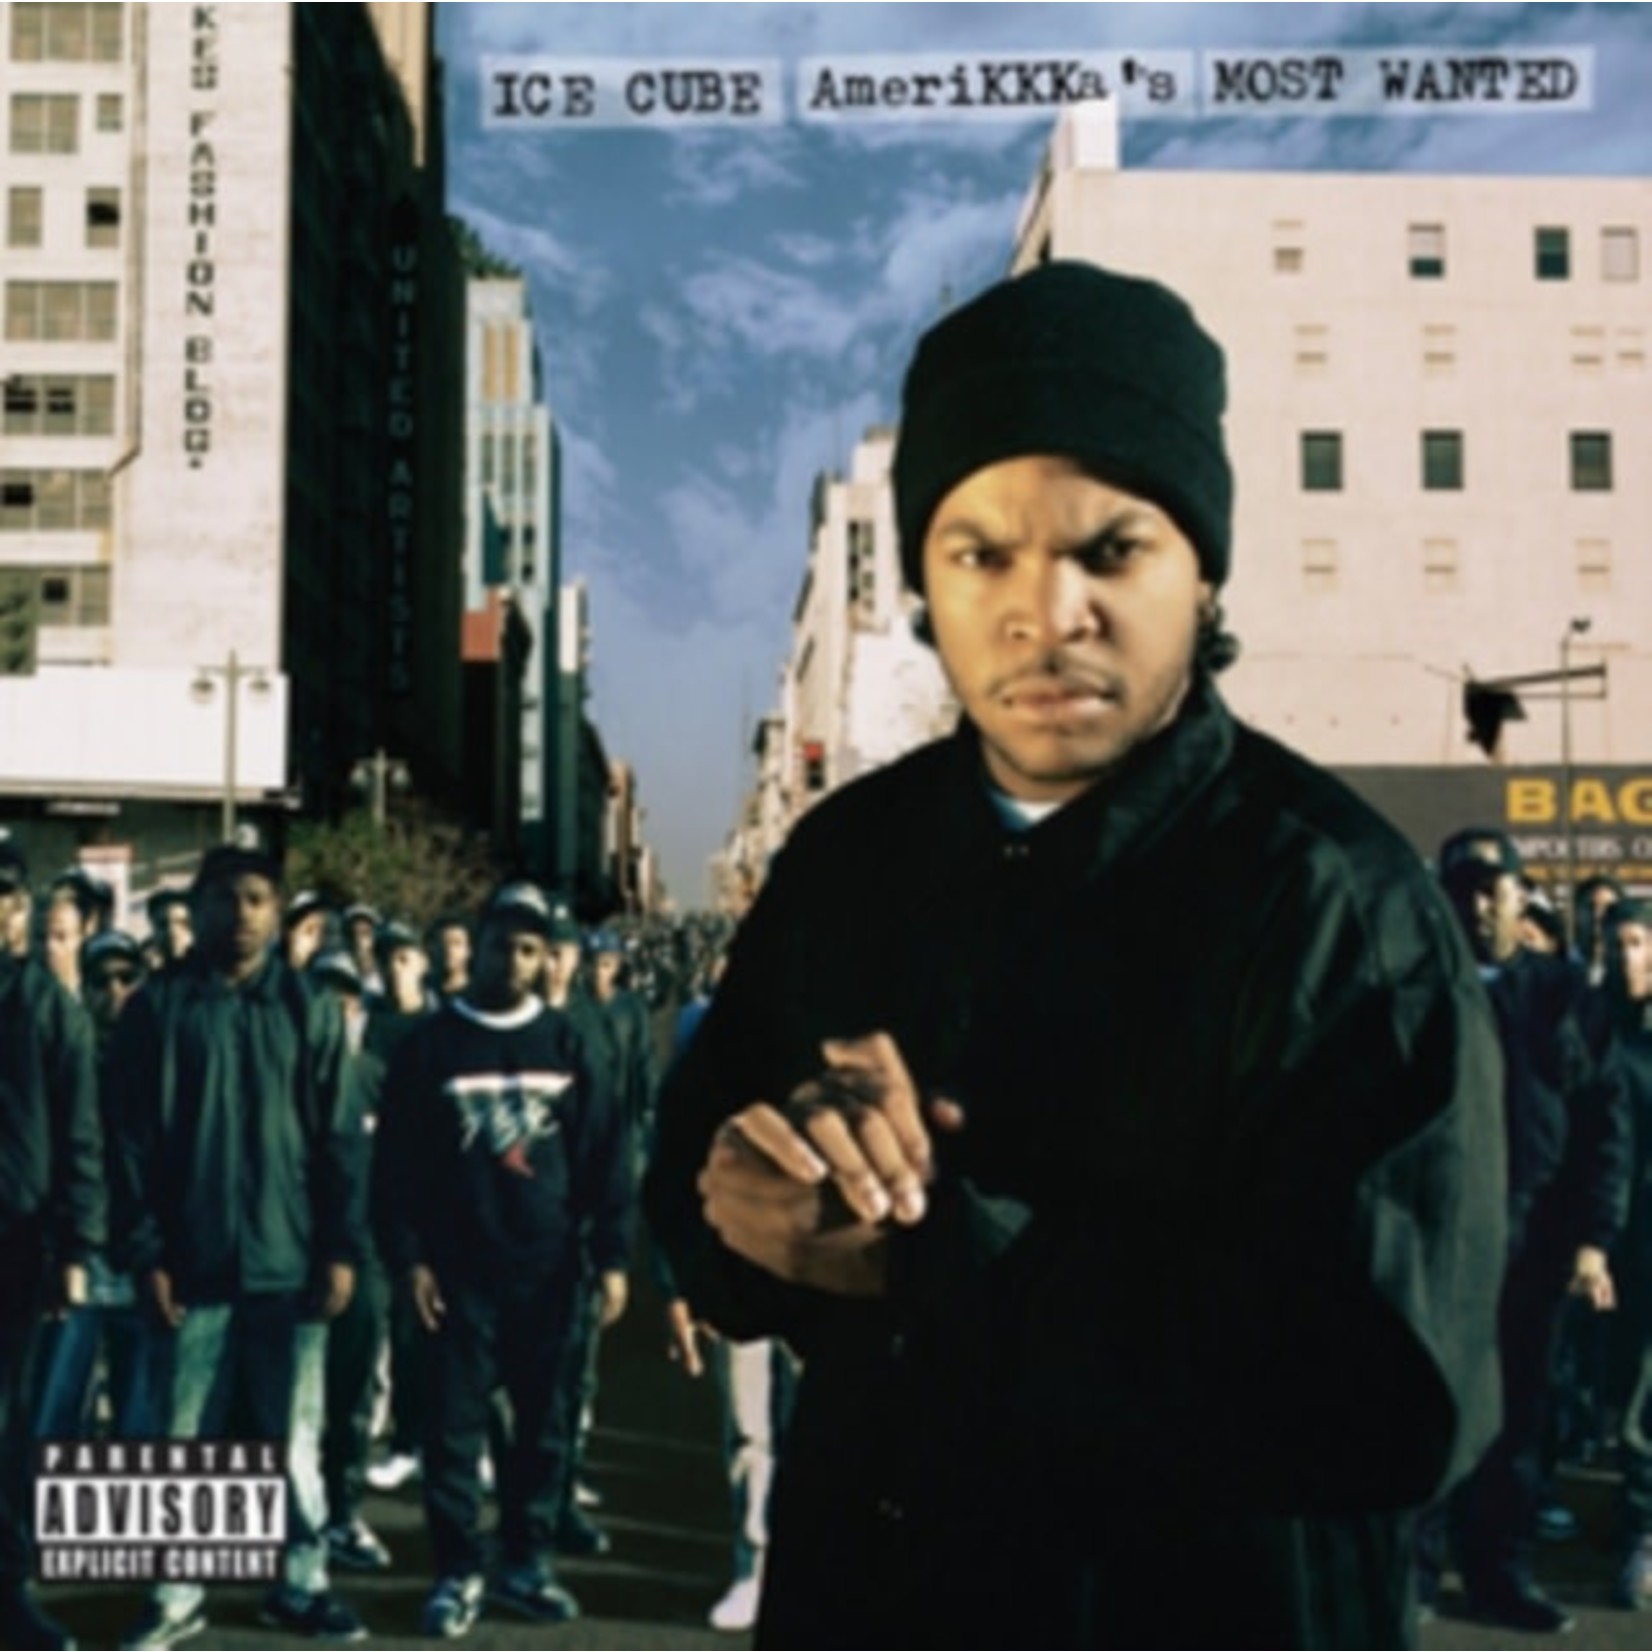 Ice Cube - Amerikkka's Most Wanted [CD]